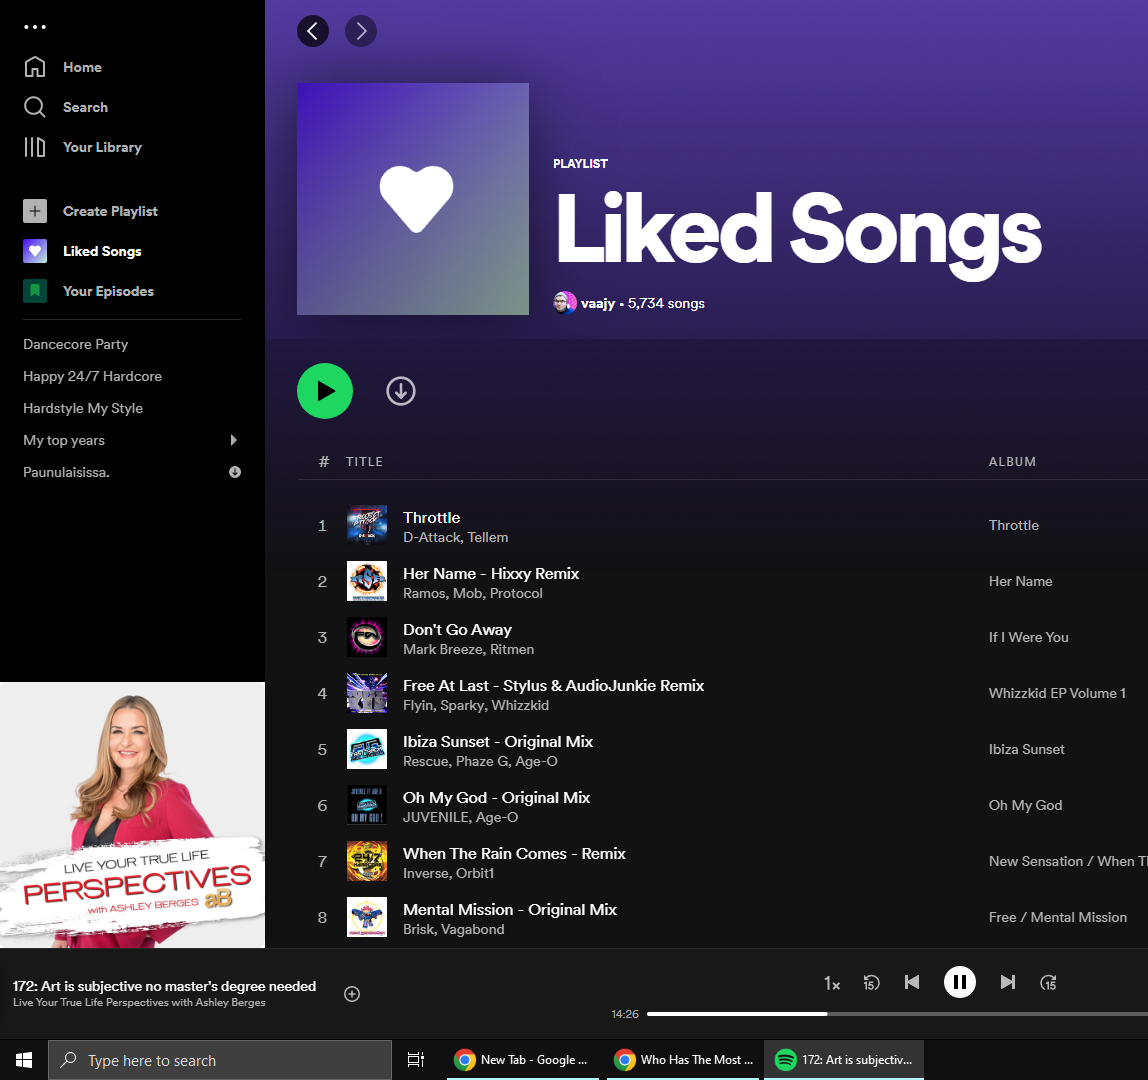 Who Has The Most Liked Songs In Their Library? - The Spotify Community